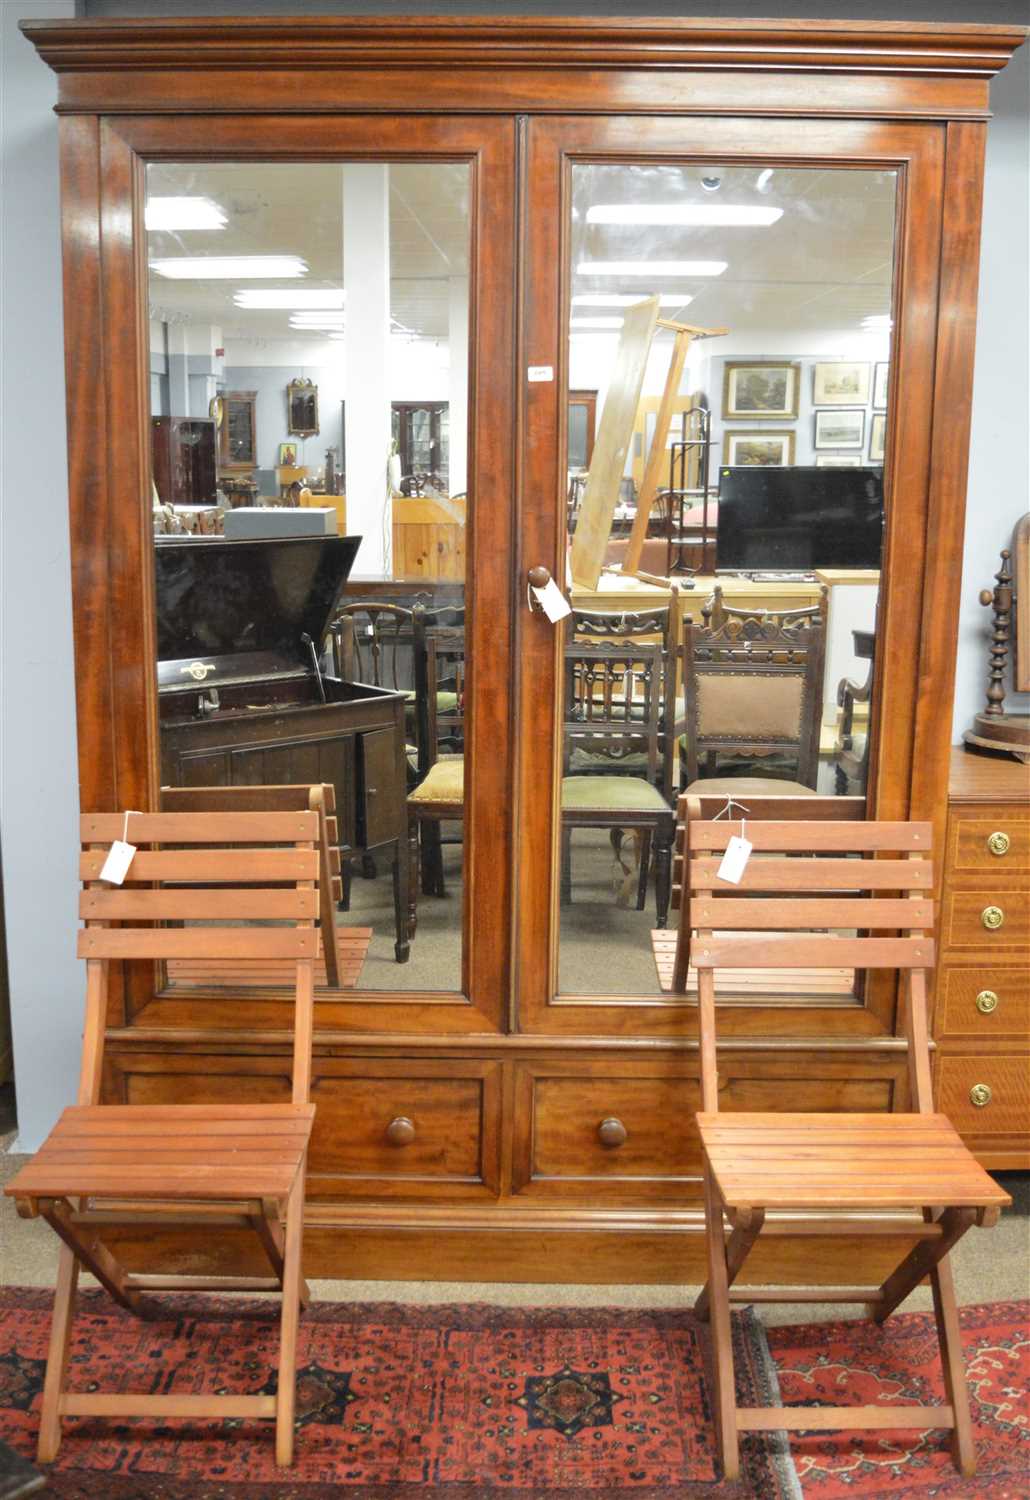 Lot 685 - Wardrobe and wooden chairs